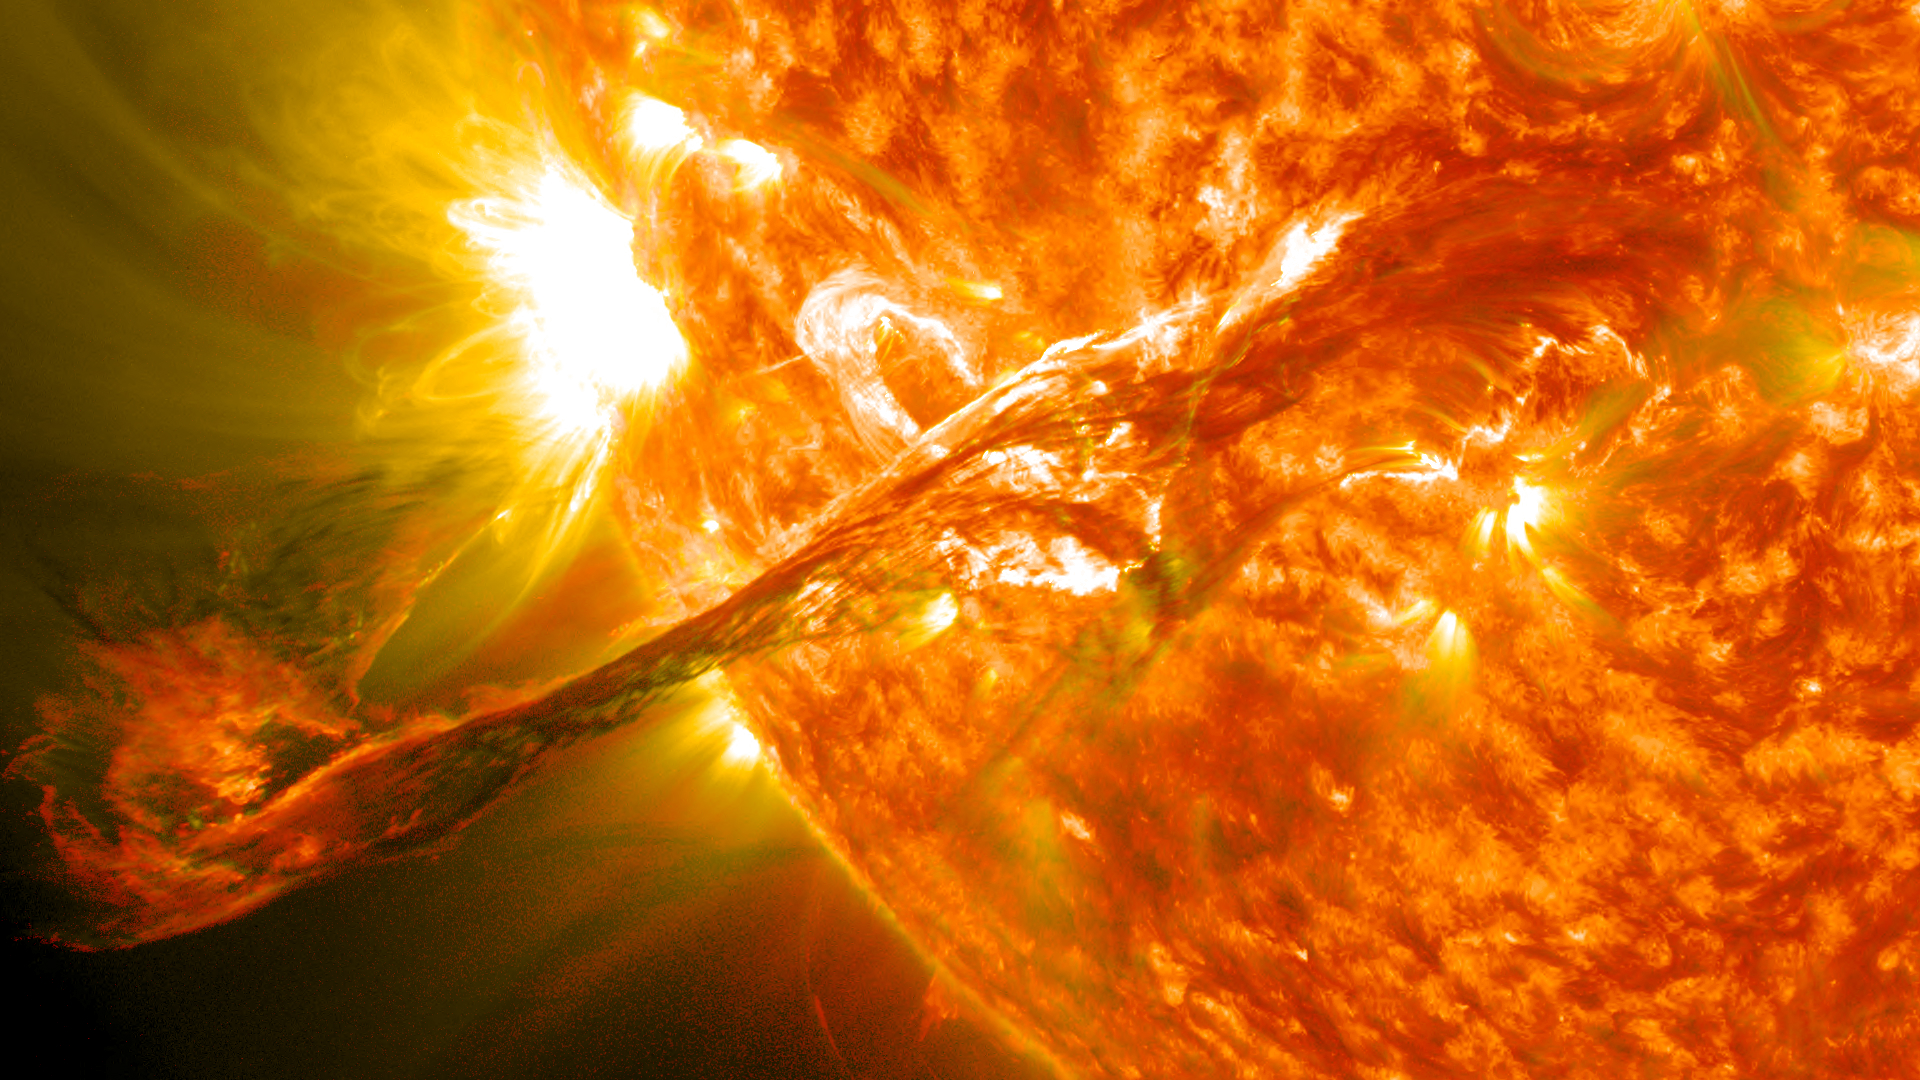 impossible to fathom facts - solar flares